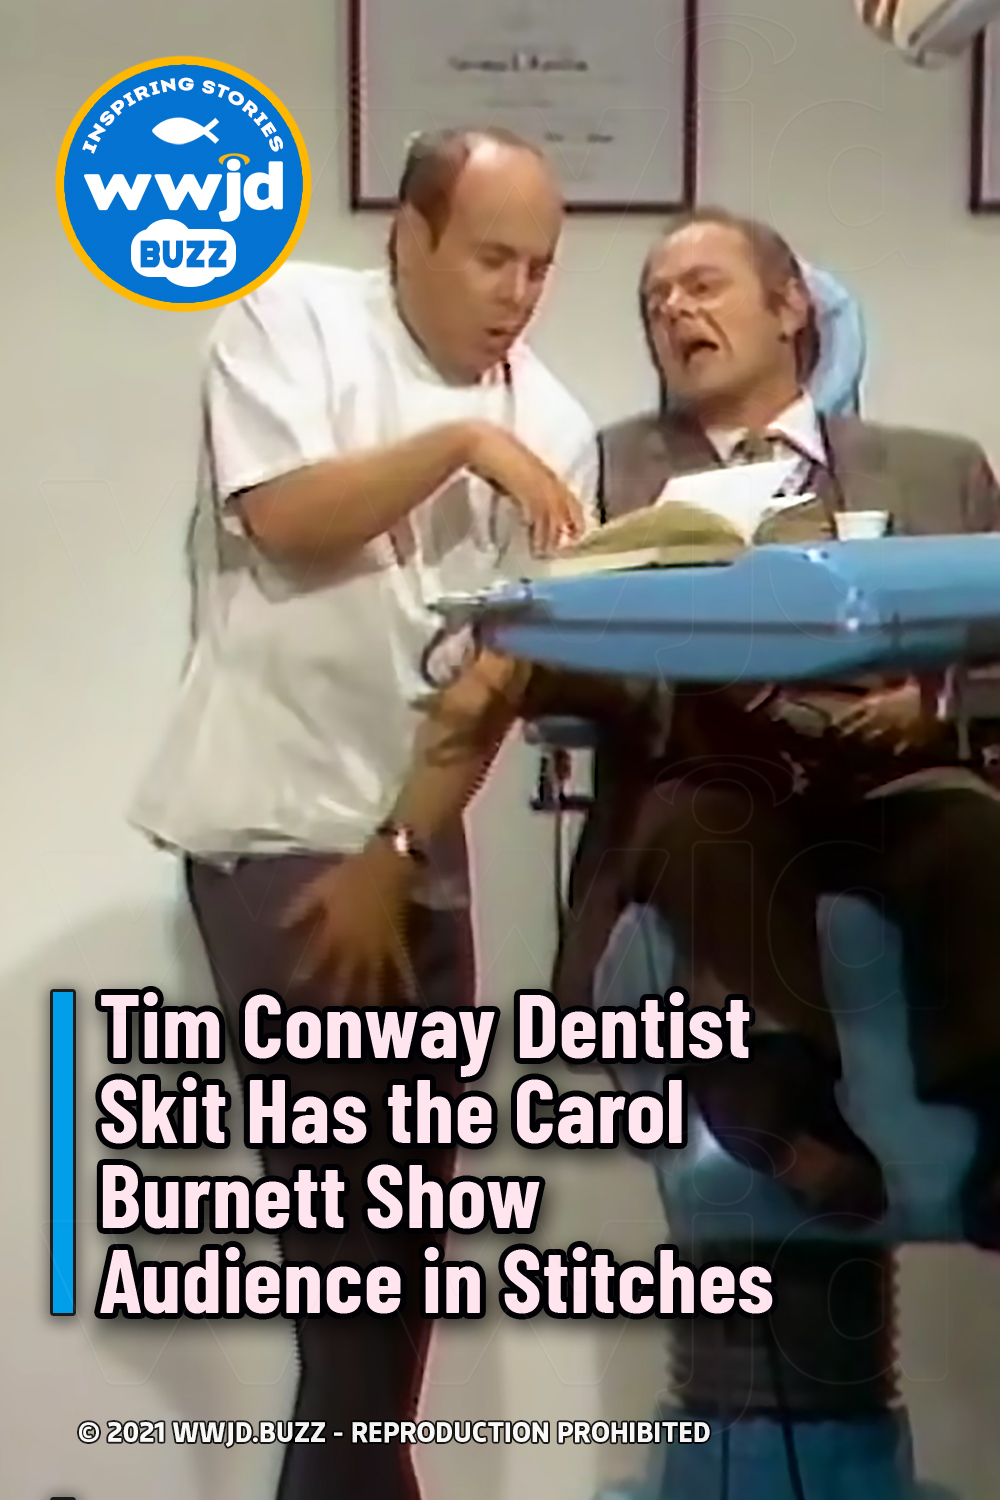 Tim Conway Dentist Skit Has the Carol Burnett Show Audience in Stitches